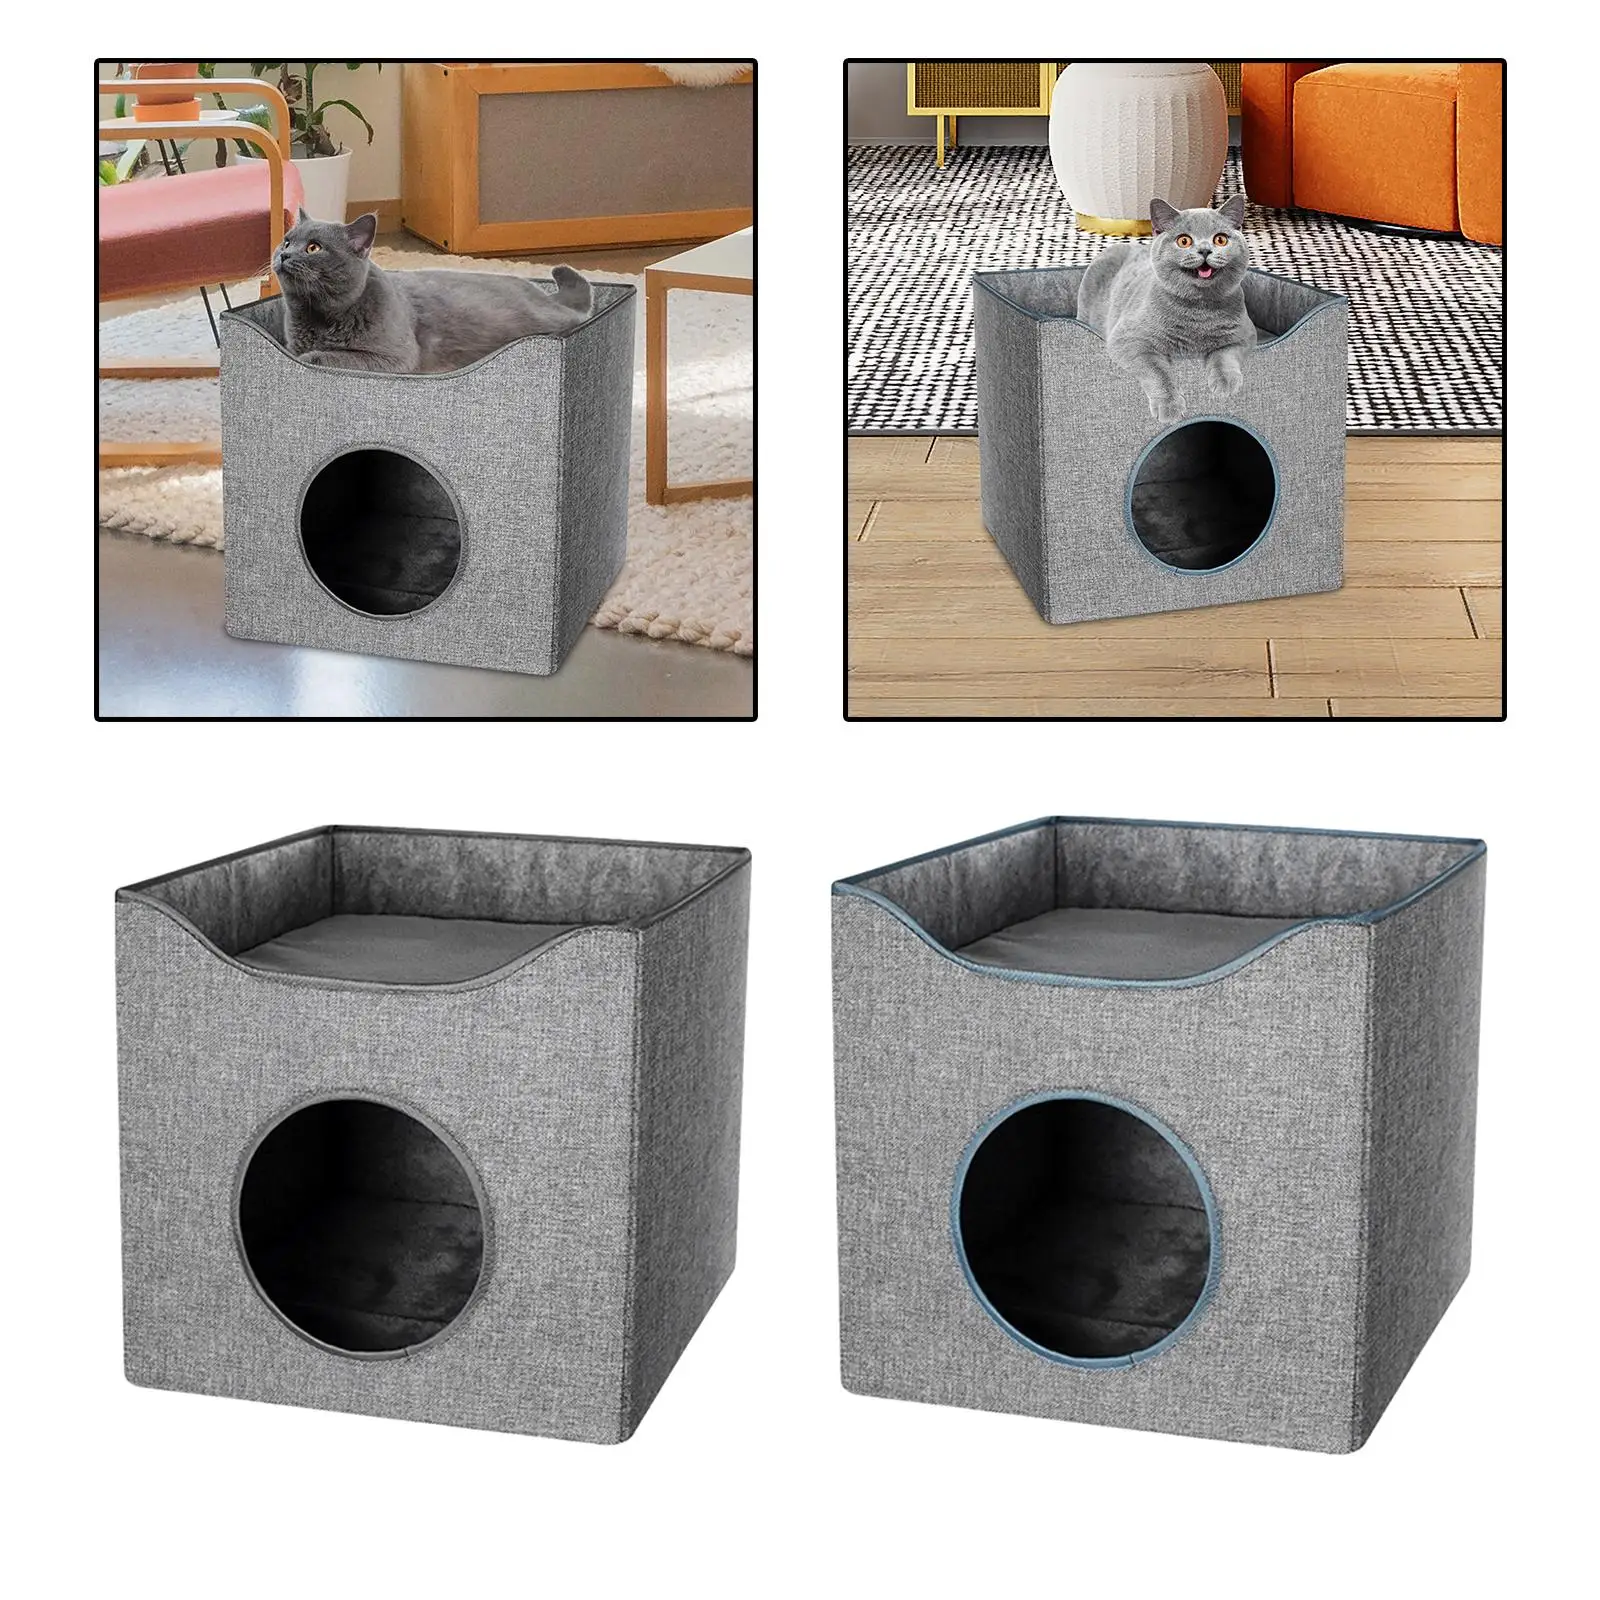 Pet Cat Bed Nest Dog House Universal Double Layer Foldable Warm Comfortable Winter Sleeping Bed Cave Puppy Kennel Pet Supplies